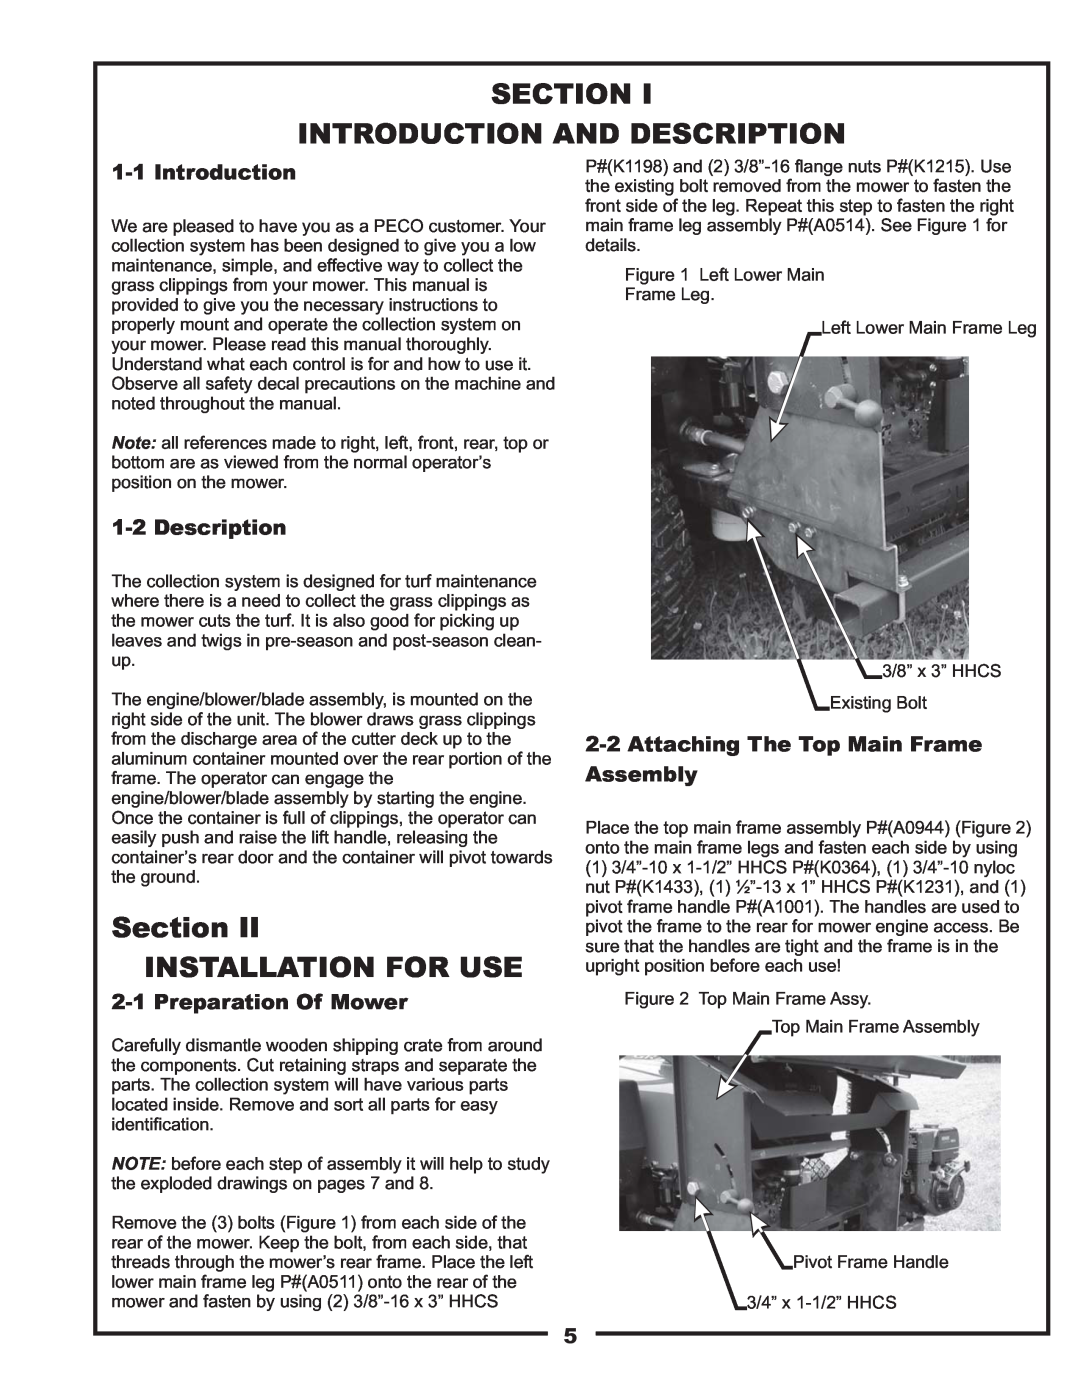 Gravely 12621209-12 manual Section Introduction And Description, Section II INSTALLATION FOR USE, Preparation Of Mower 